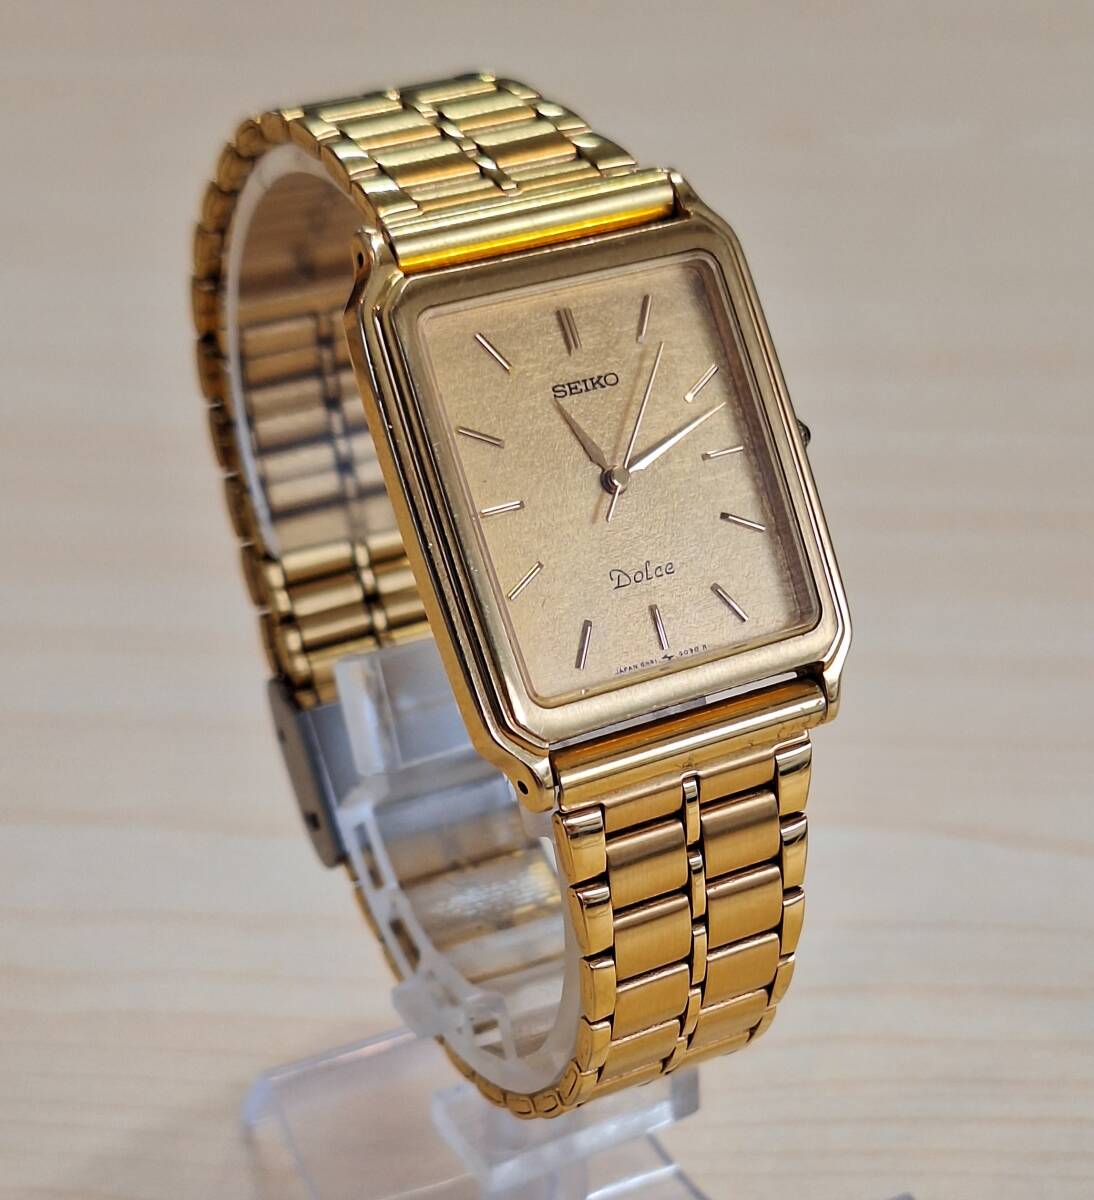 SEIKO Seiko Dolce Dolce 14KT 14 gold quartz gold face 8N41-5080 men's wristwatch immovable goods 